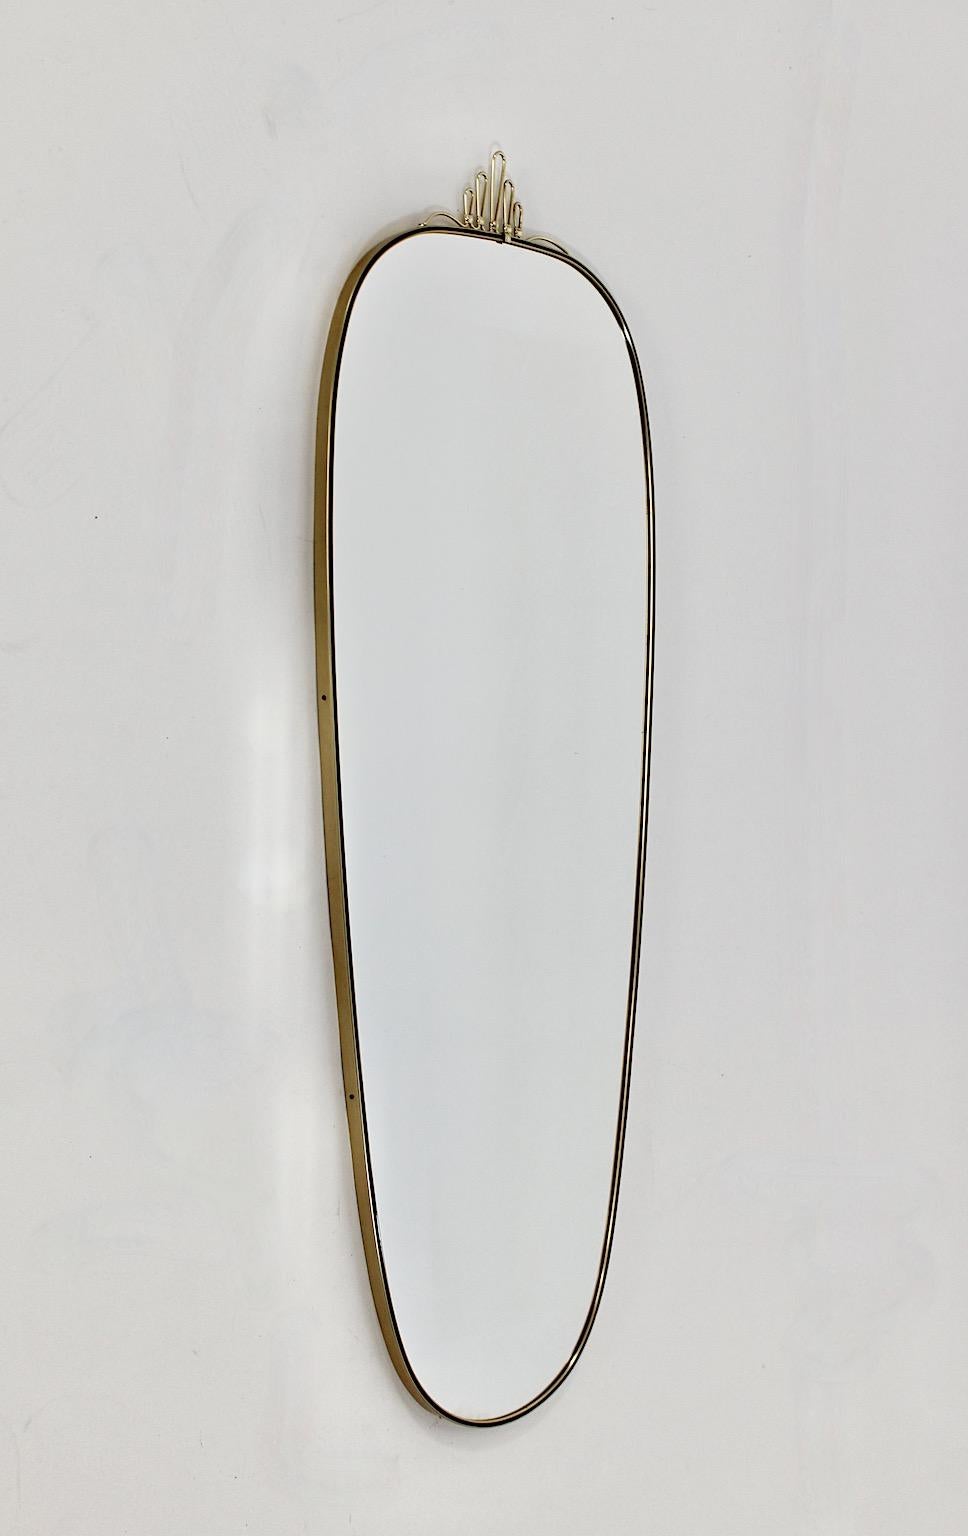 Mid Century Modern vintage oval like full length mirror or wall mirror from brass and golden metal 1950s Italy.
A wonderful vintage full length mirror in elegant oval and classic shape.
While the brass frame shows beautiful patina, the mirror glass